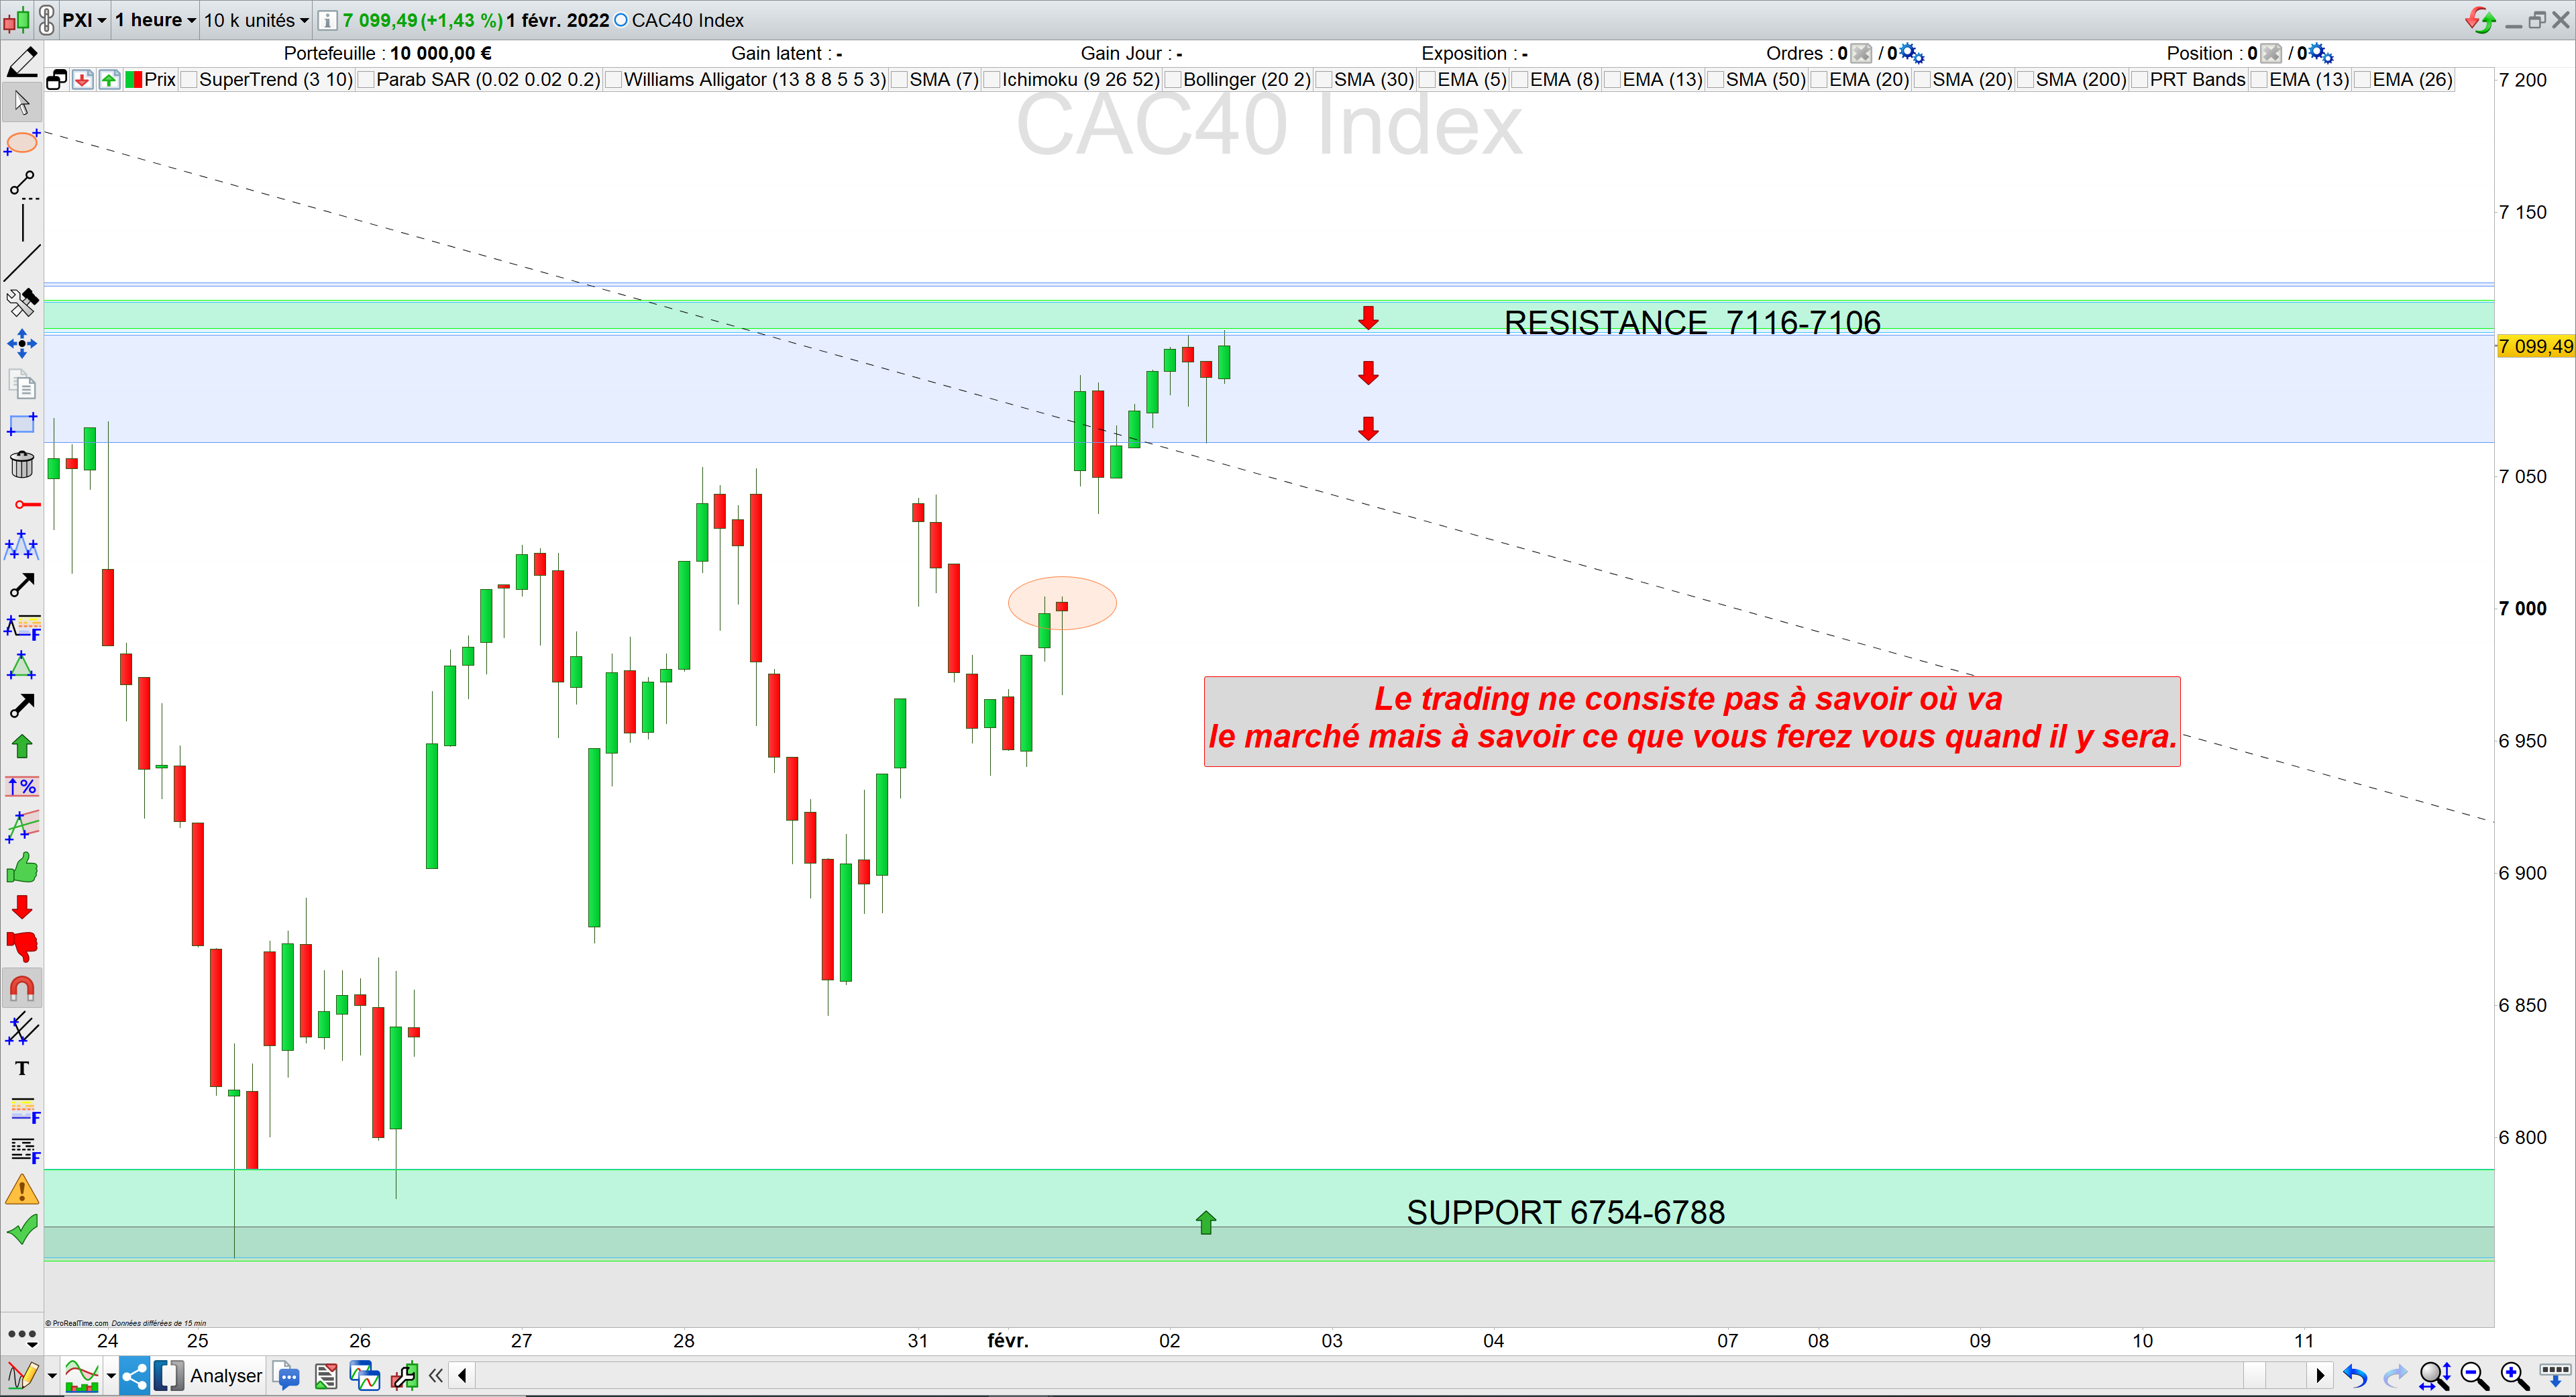 Trading cac40 02/02/22